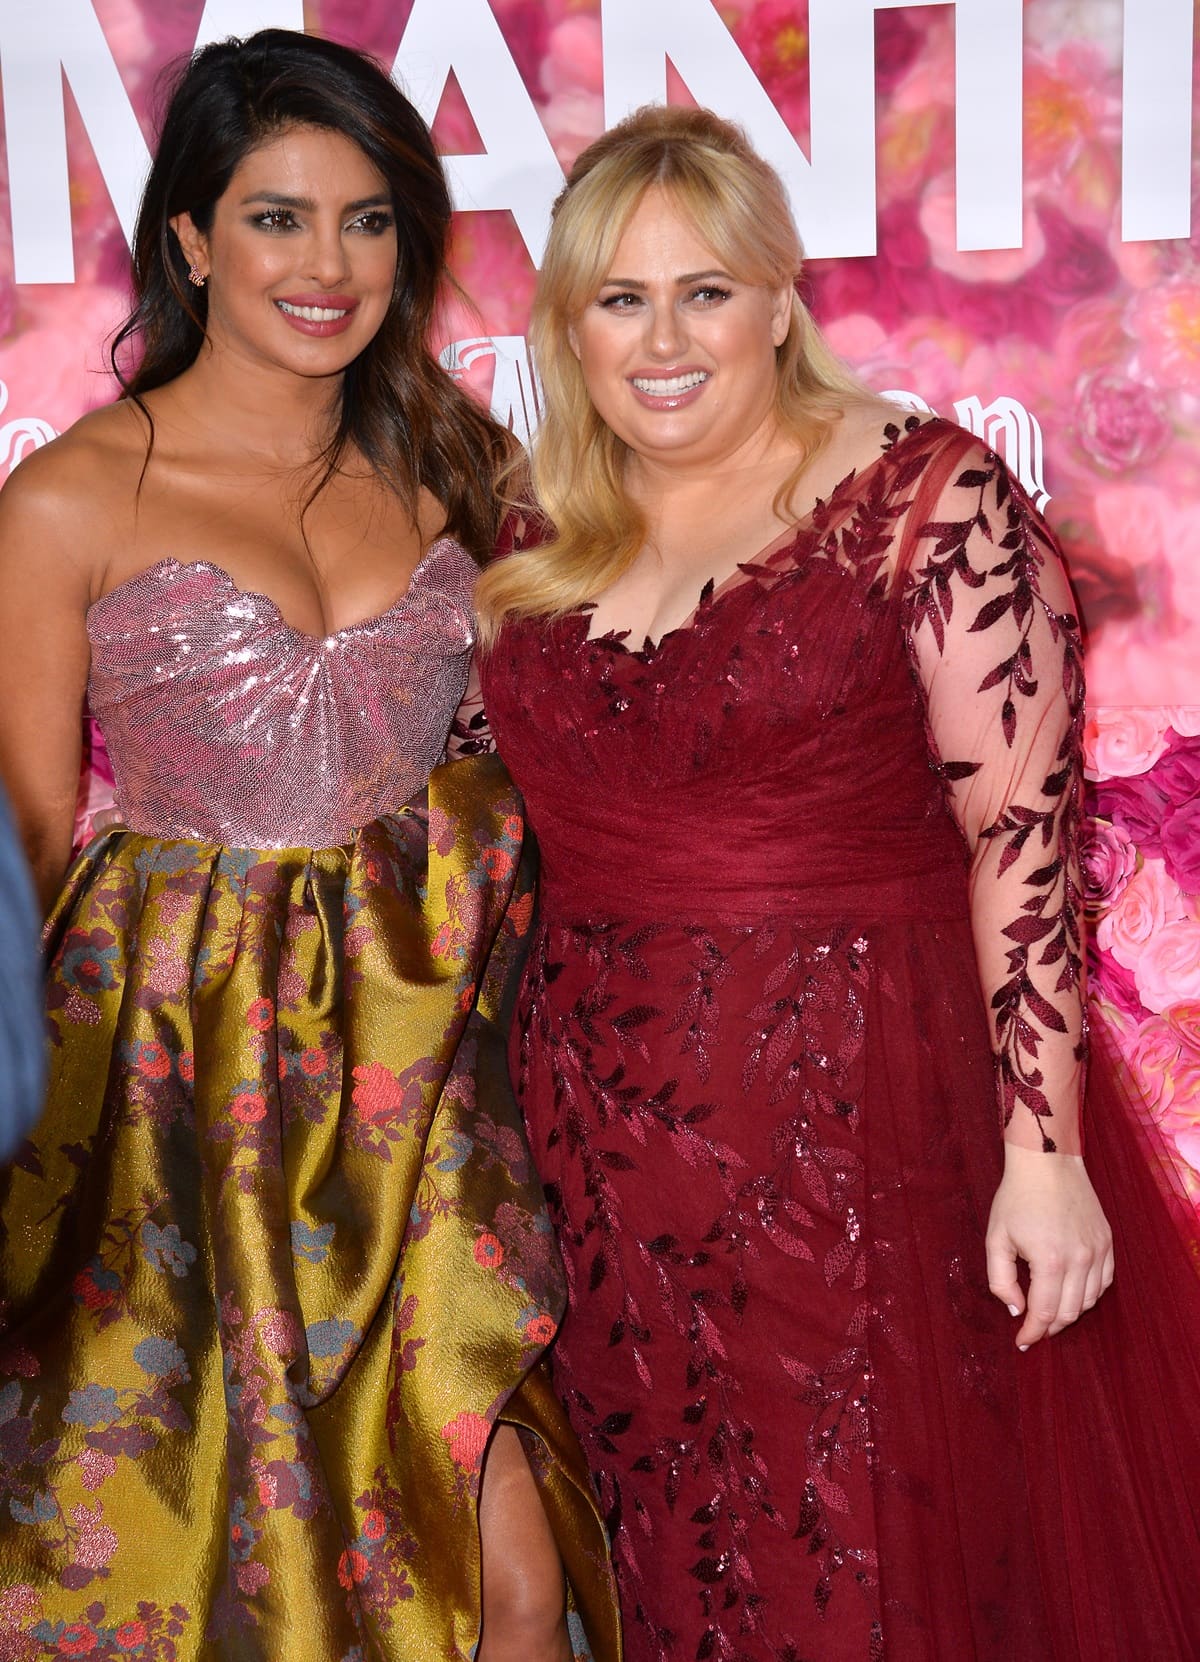 Rebel Wilson stands at 5 feet 2 ½ inches (158.8 cm), while Priyanka Chopra is approximately 3 ½ inches (8.8 cm) taller with a height of 5 feet 6 inches (167.6 cm)